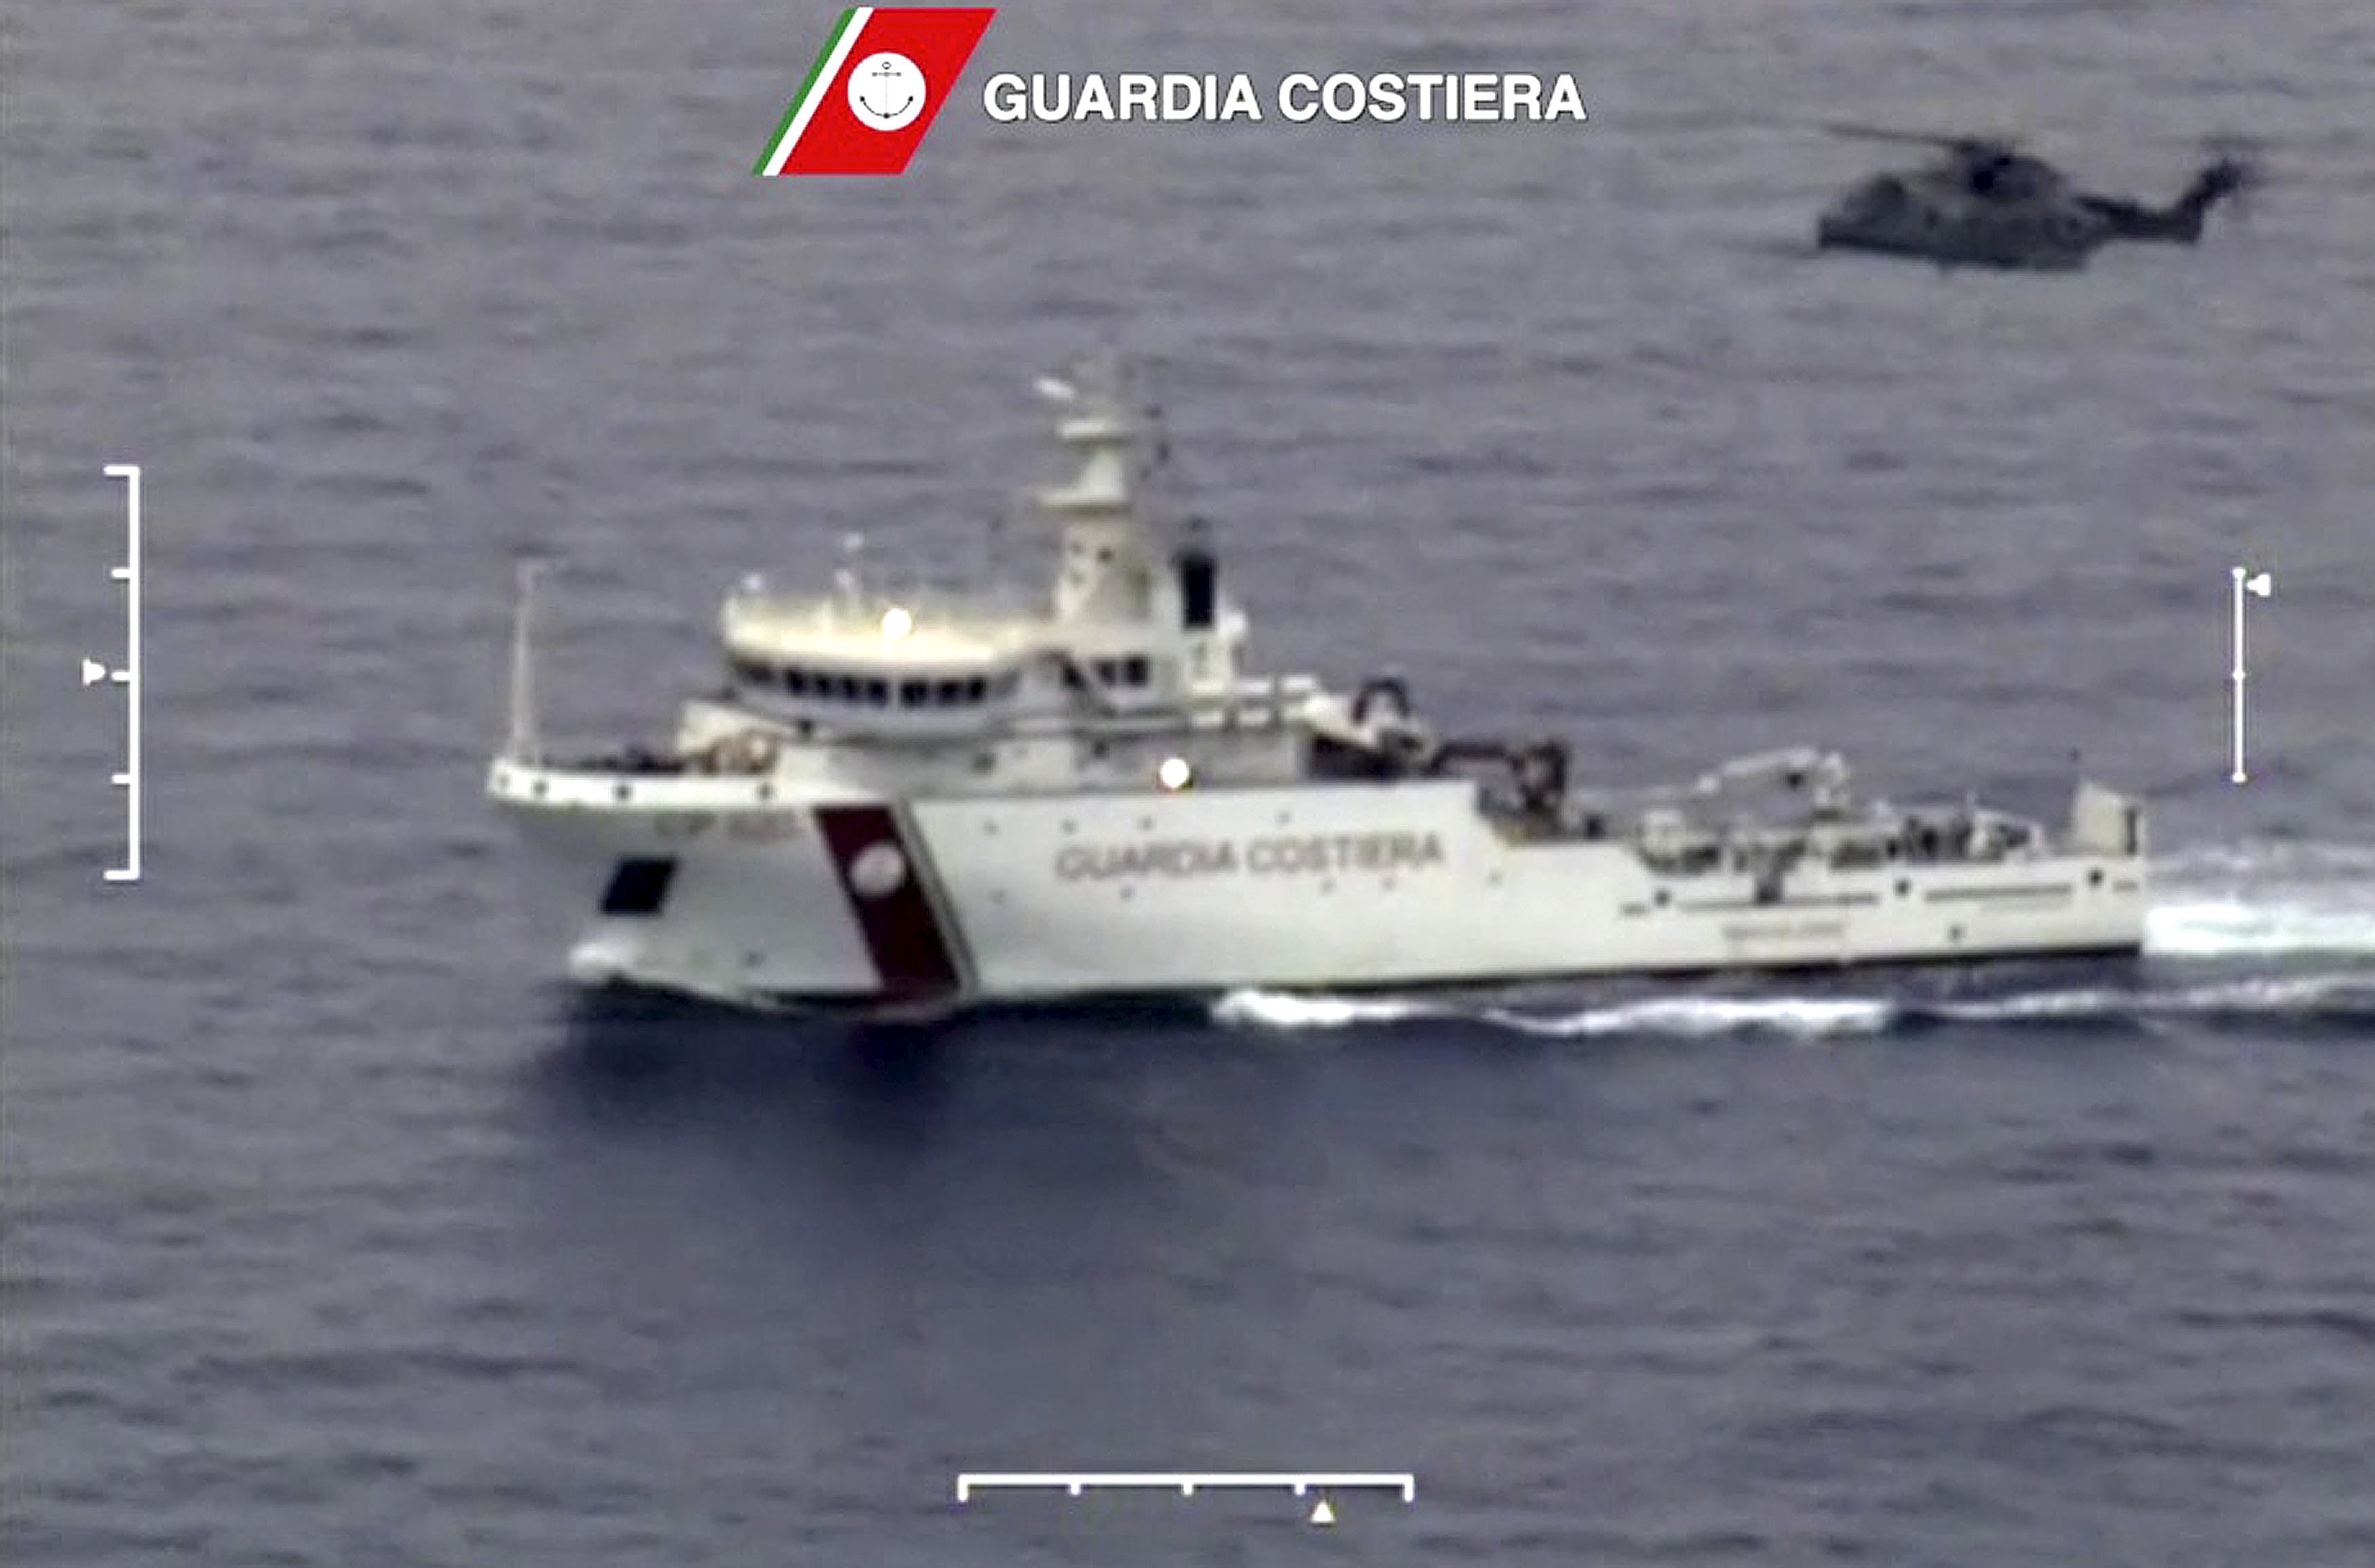 An Italian coast guard vessel is seen with an helicopter during the search and rescue operation underway after a boat carrying migrants capsized overnight, in this still image taken from video